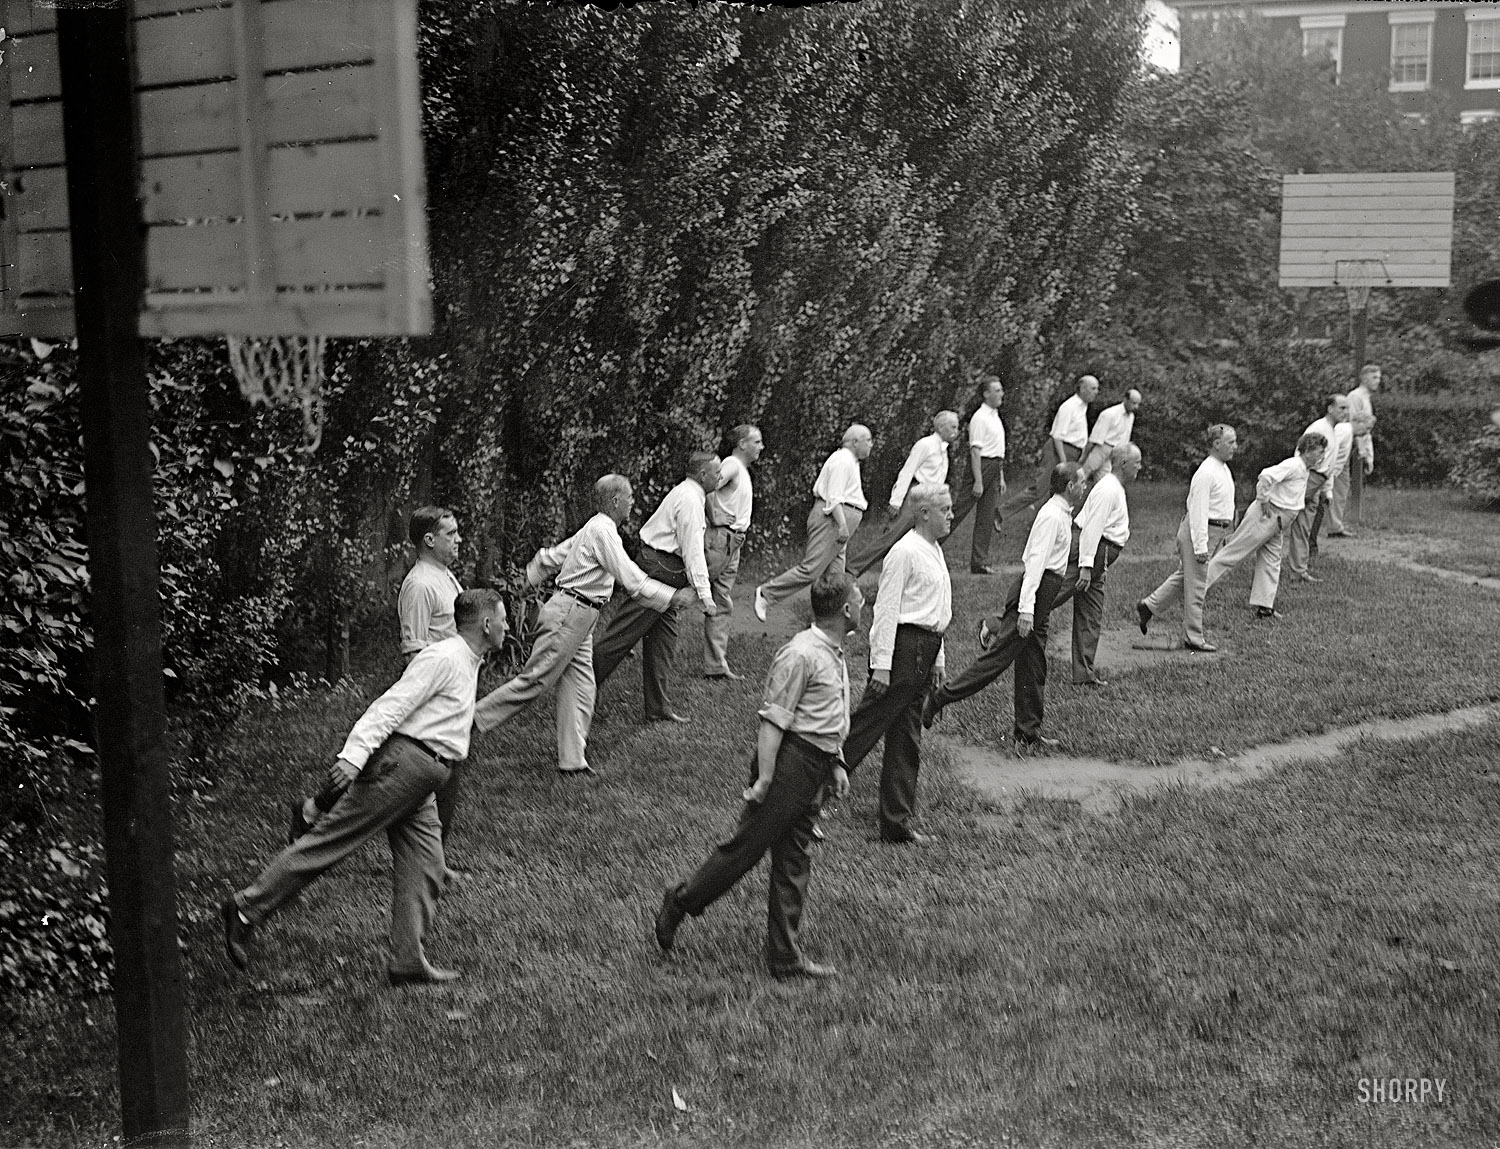 1917. "Walter Camp exercise school. Cabinet officials exercising with other government officials." This seems to have been a manifestation of the "defense league" movement led by former Yale footballer Walter Camp. Anyone up for some miniature base(ket)ball? Harris & Ewing glass negative. View full size.